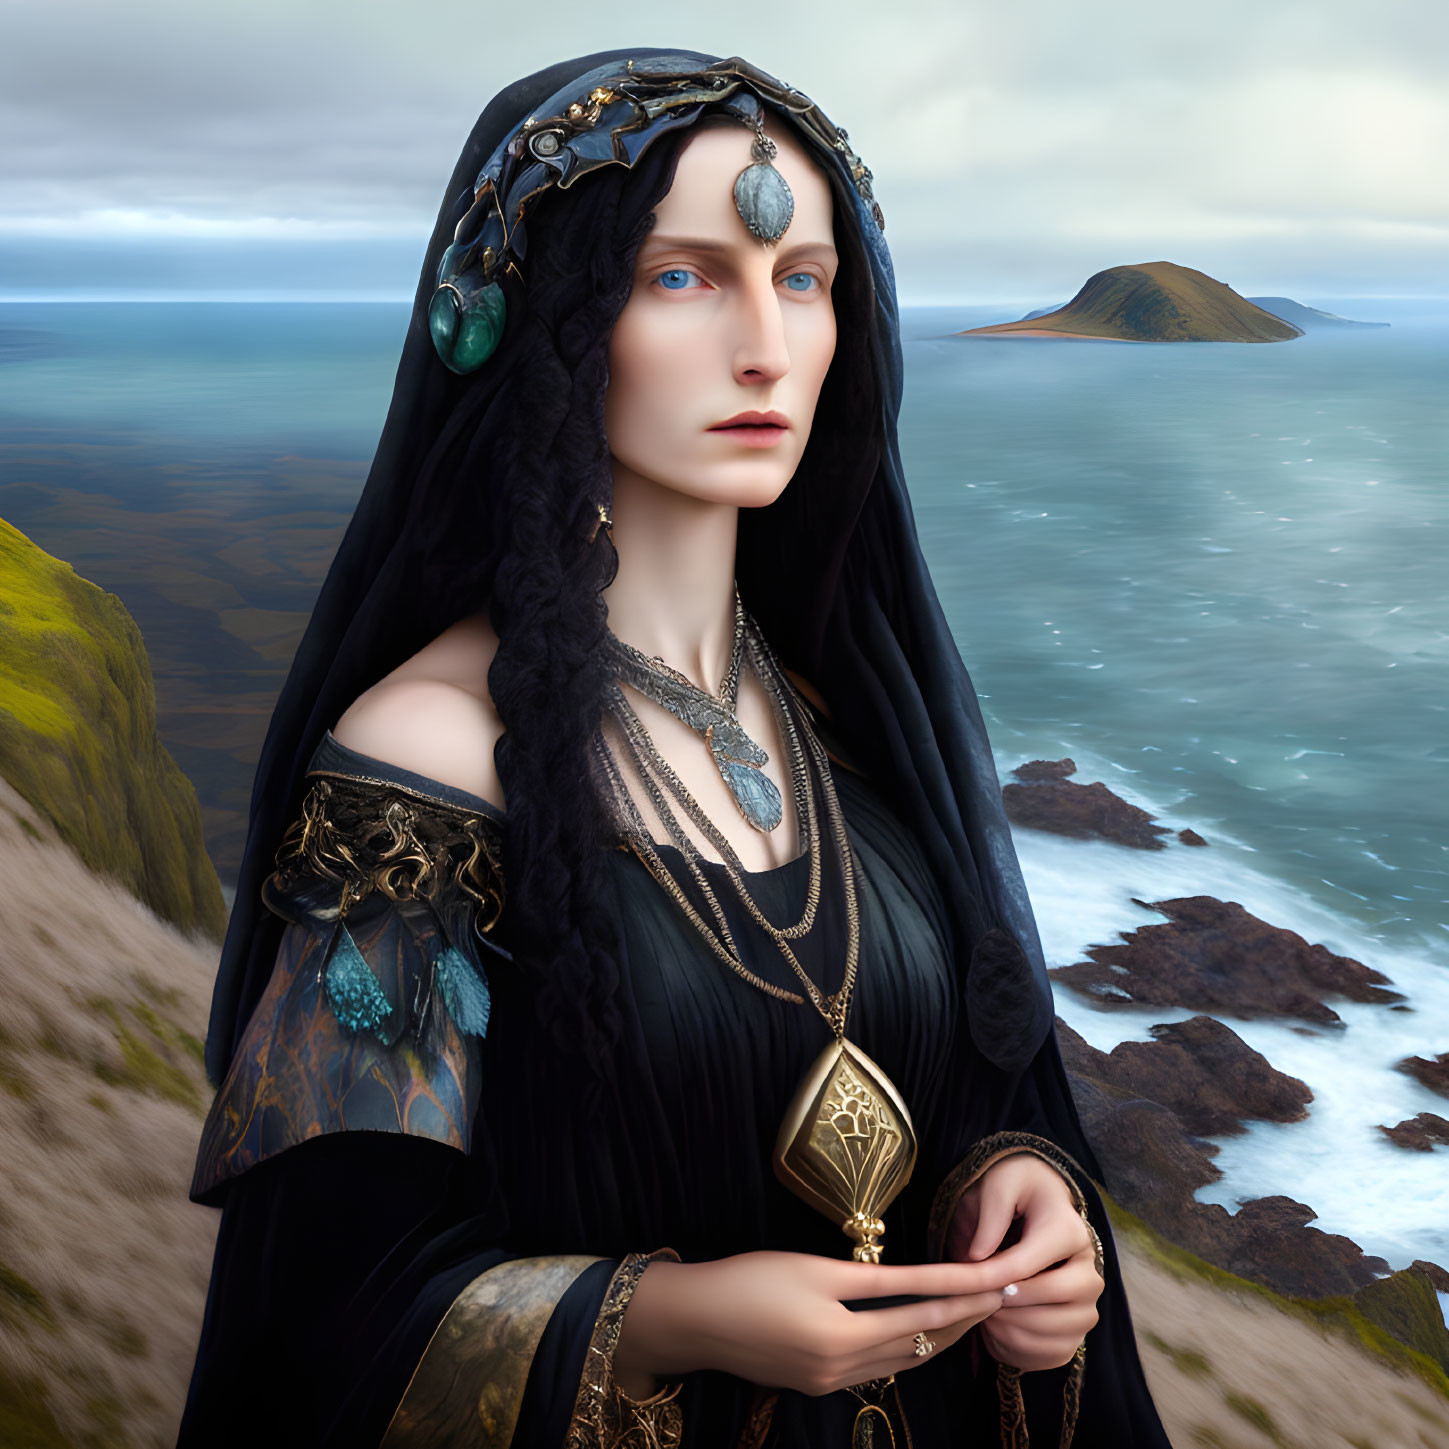 Branwen of Wales by the Sea